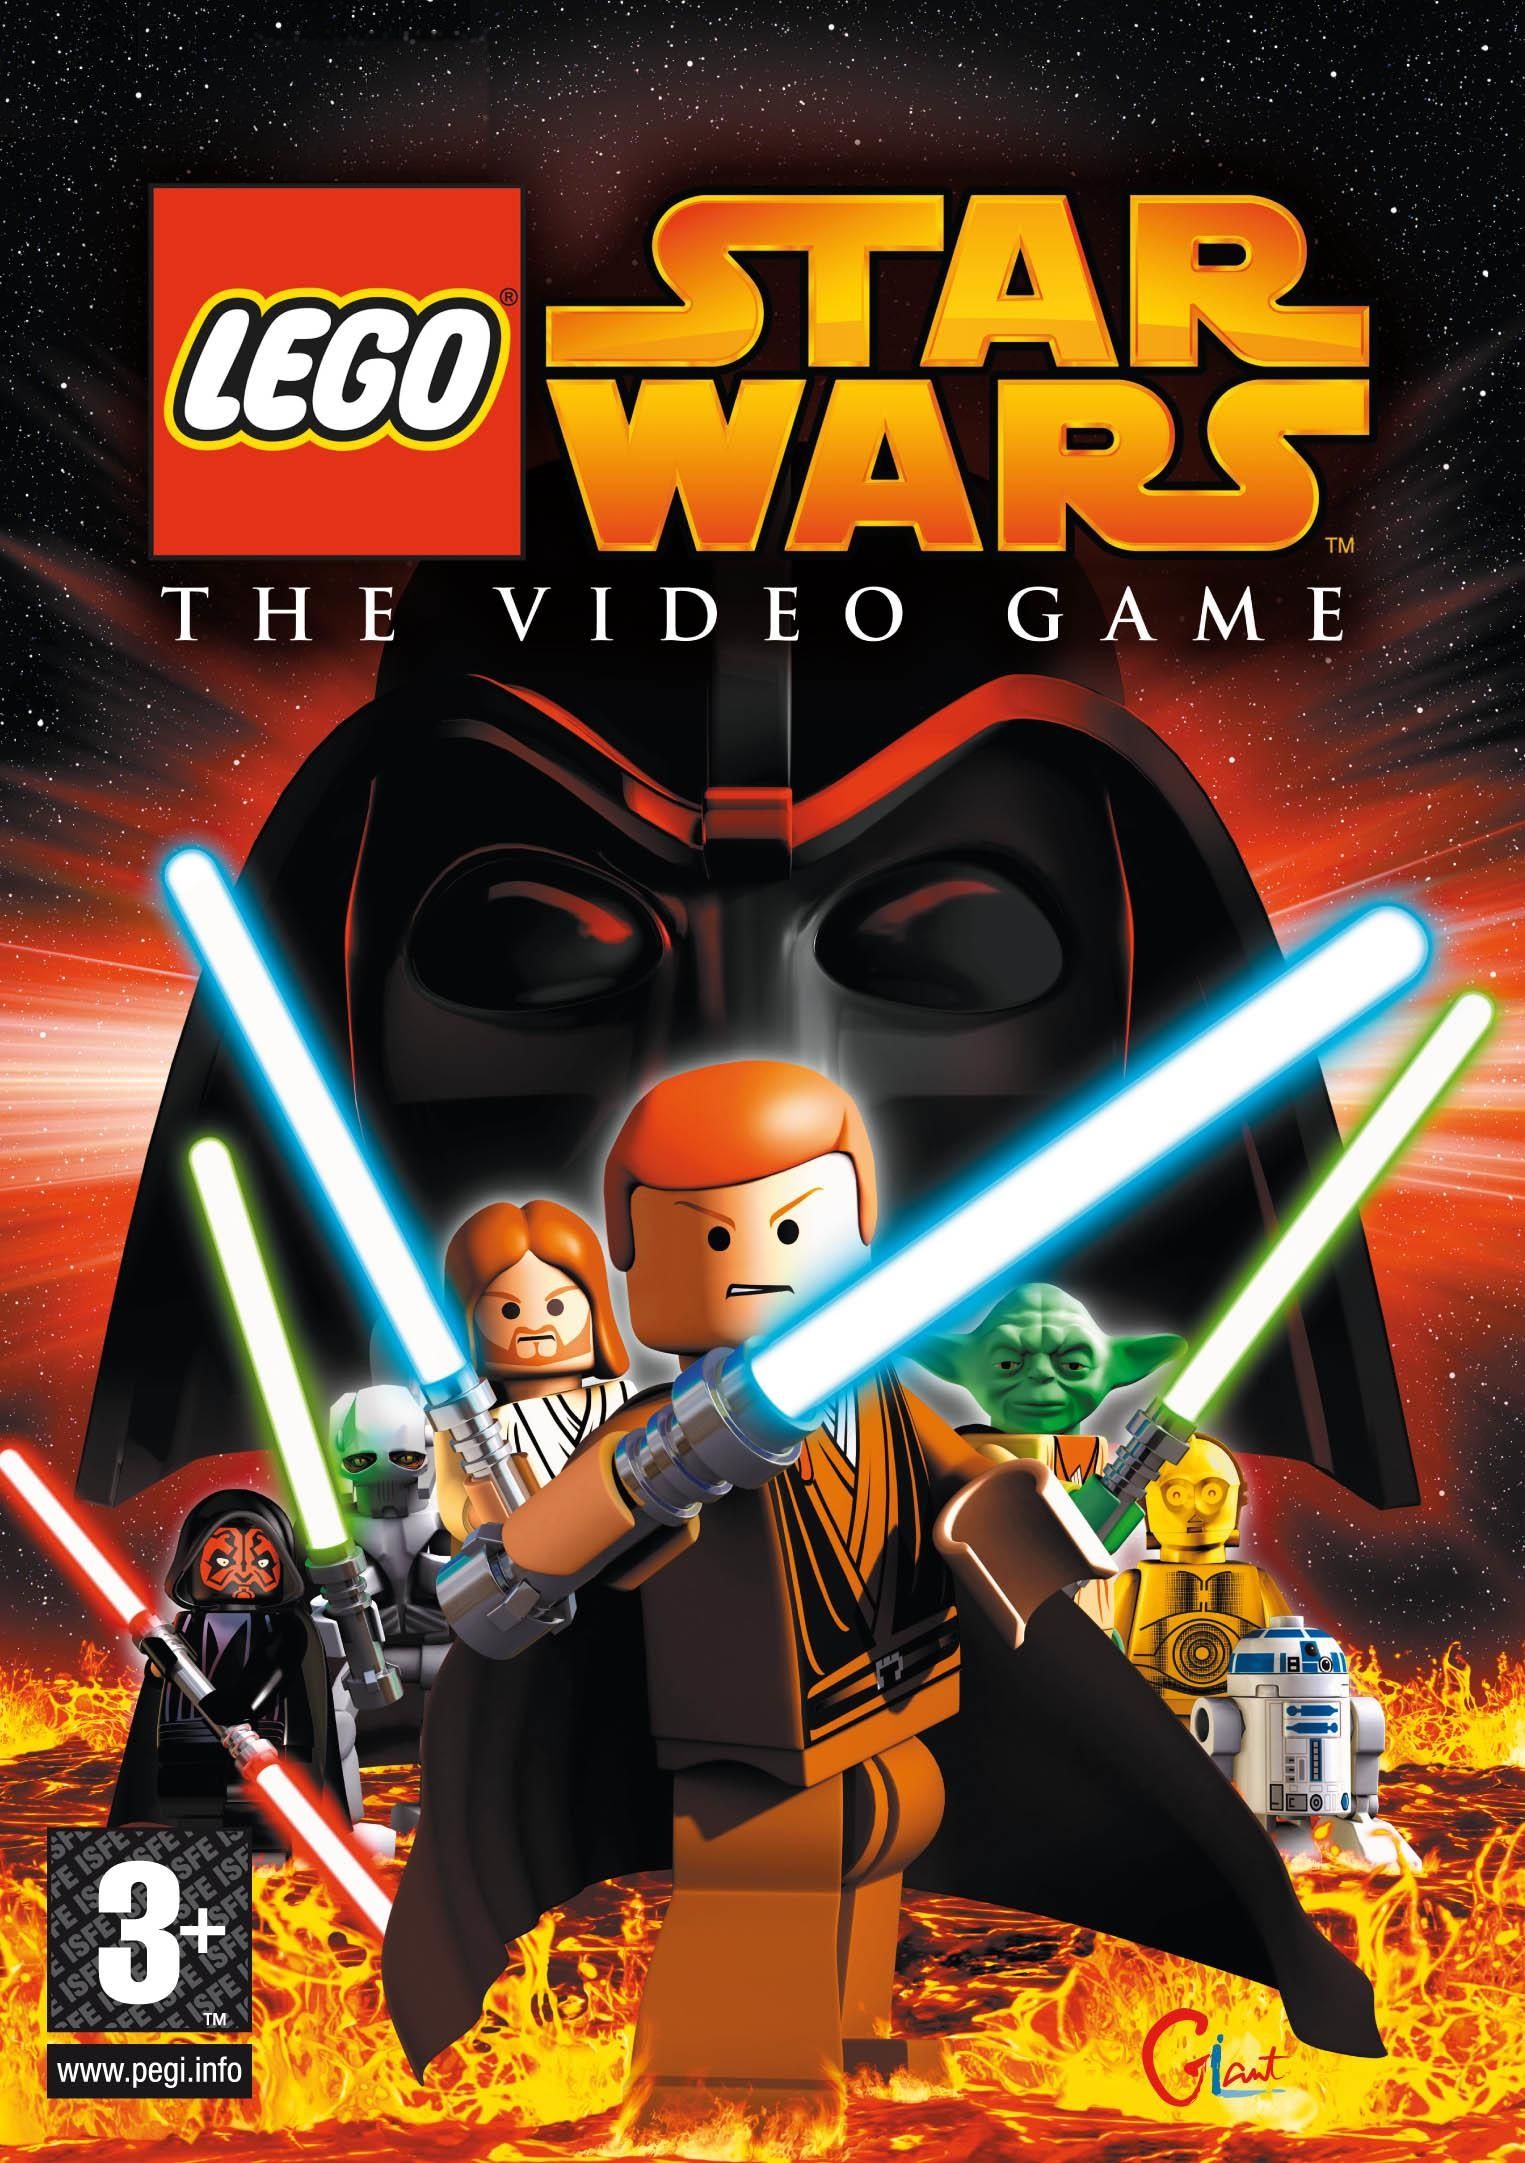 Star Wars The Video Game